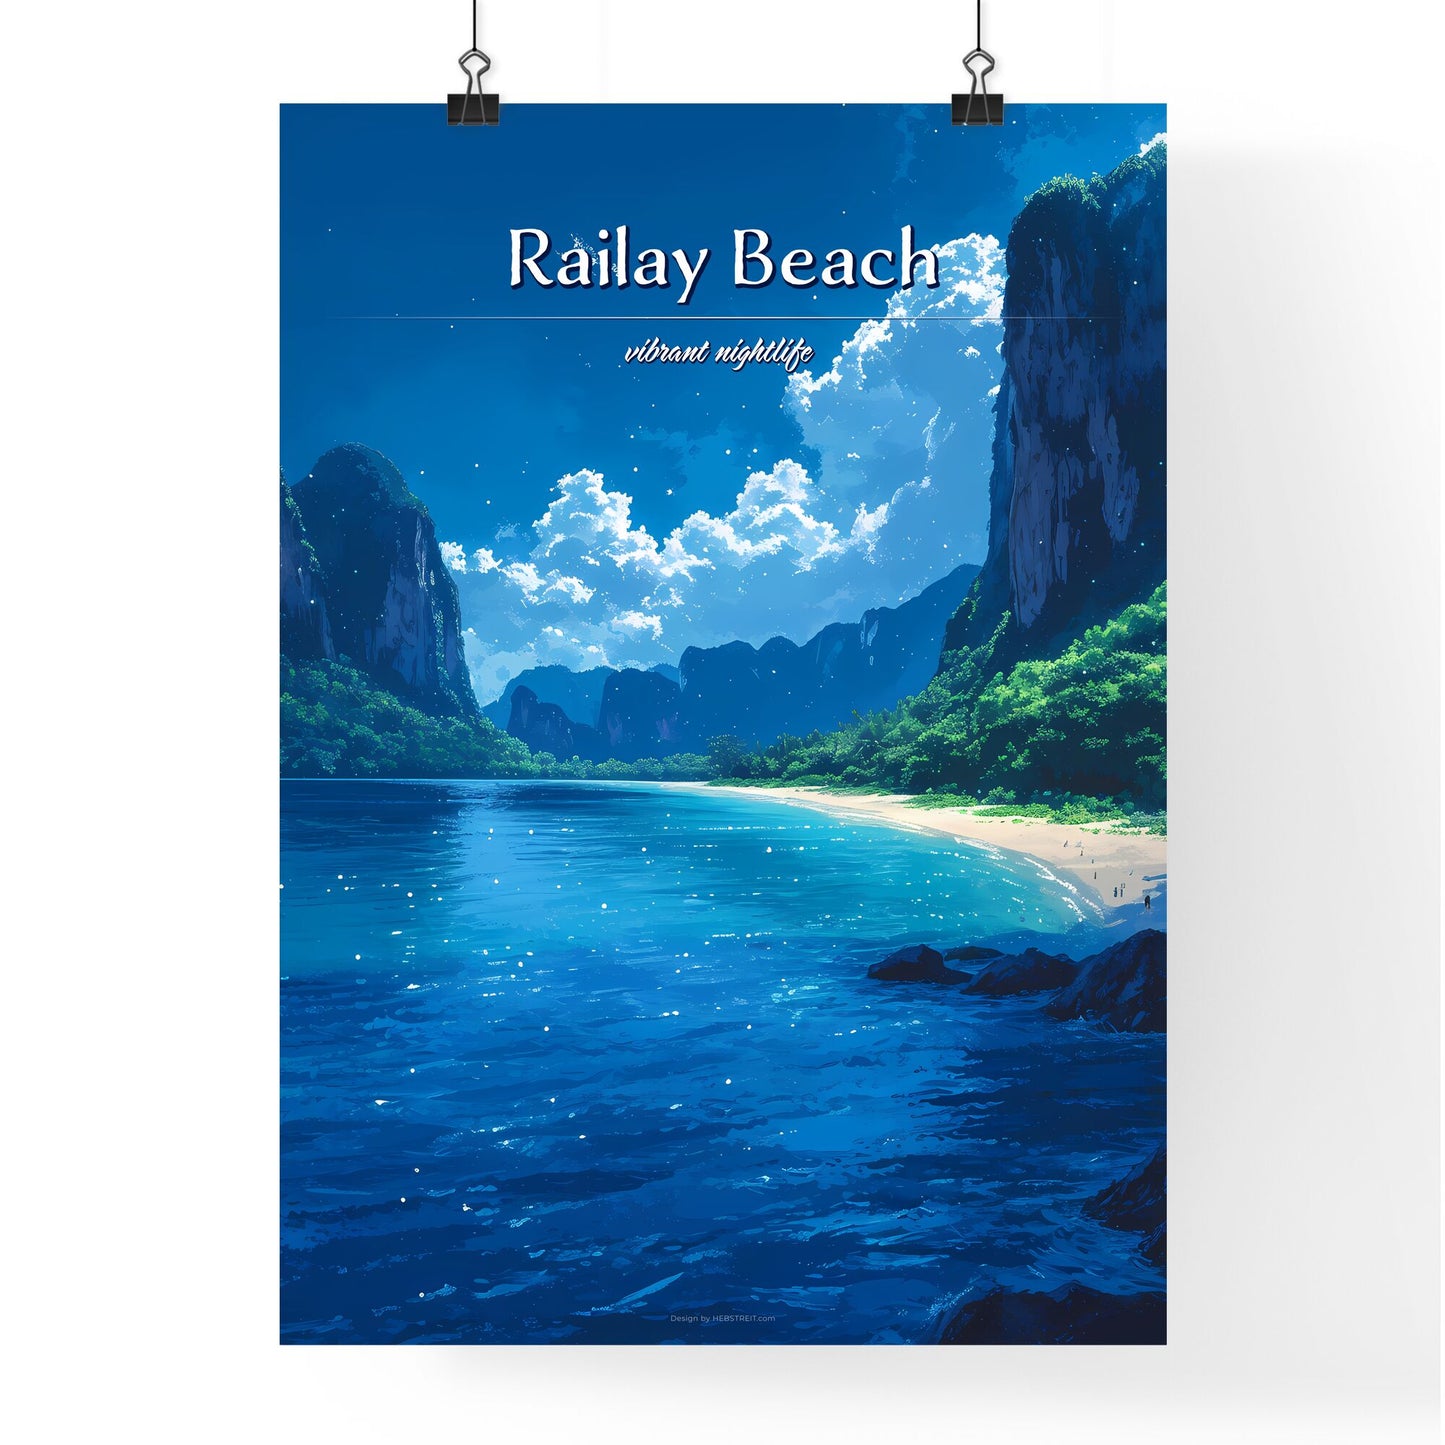 Railay Beach - Art print of a beach with trees and mountains Default Title